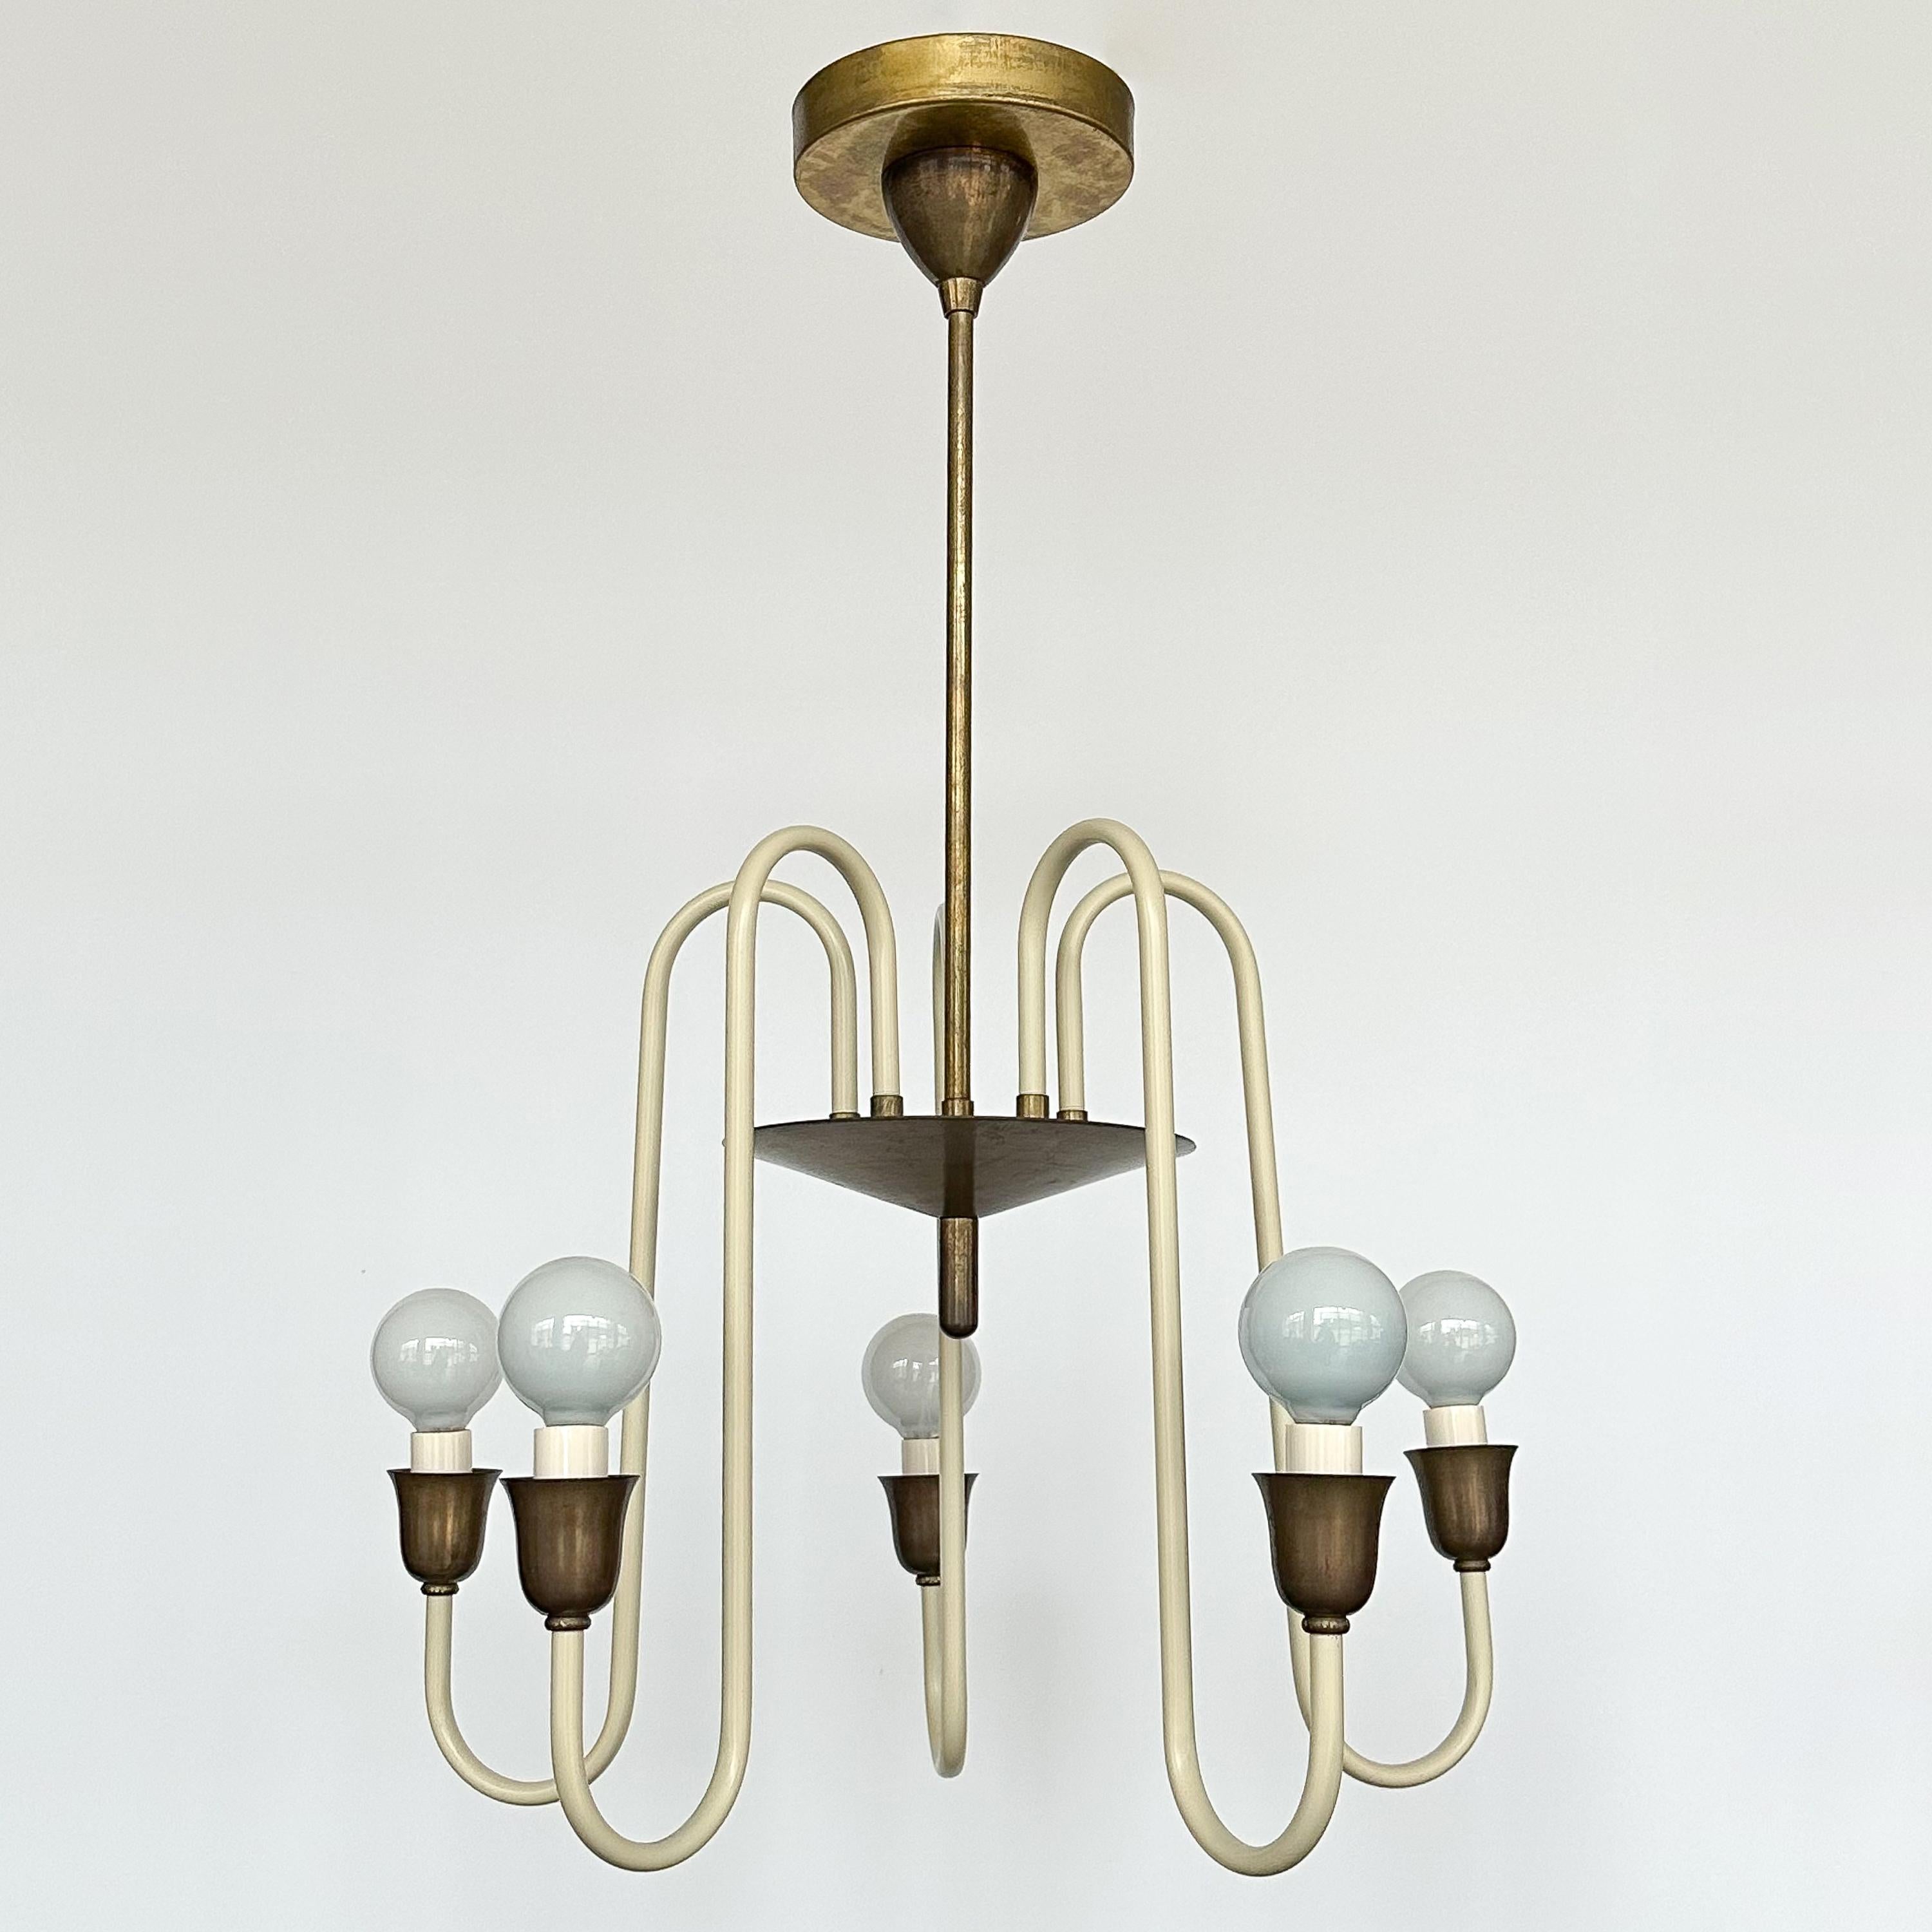 A cream lacquered and brass five light chandelier, France circa 1950s. This chandelier features 5 curved cream lacquered stems that radiate from a central brass hug and terminate with tulip shaped cups. The hardware is a beautifully patinated brass.